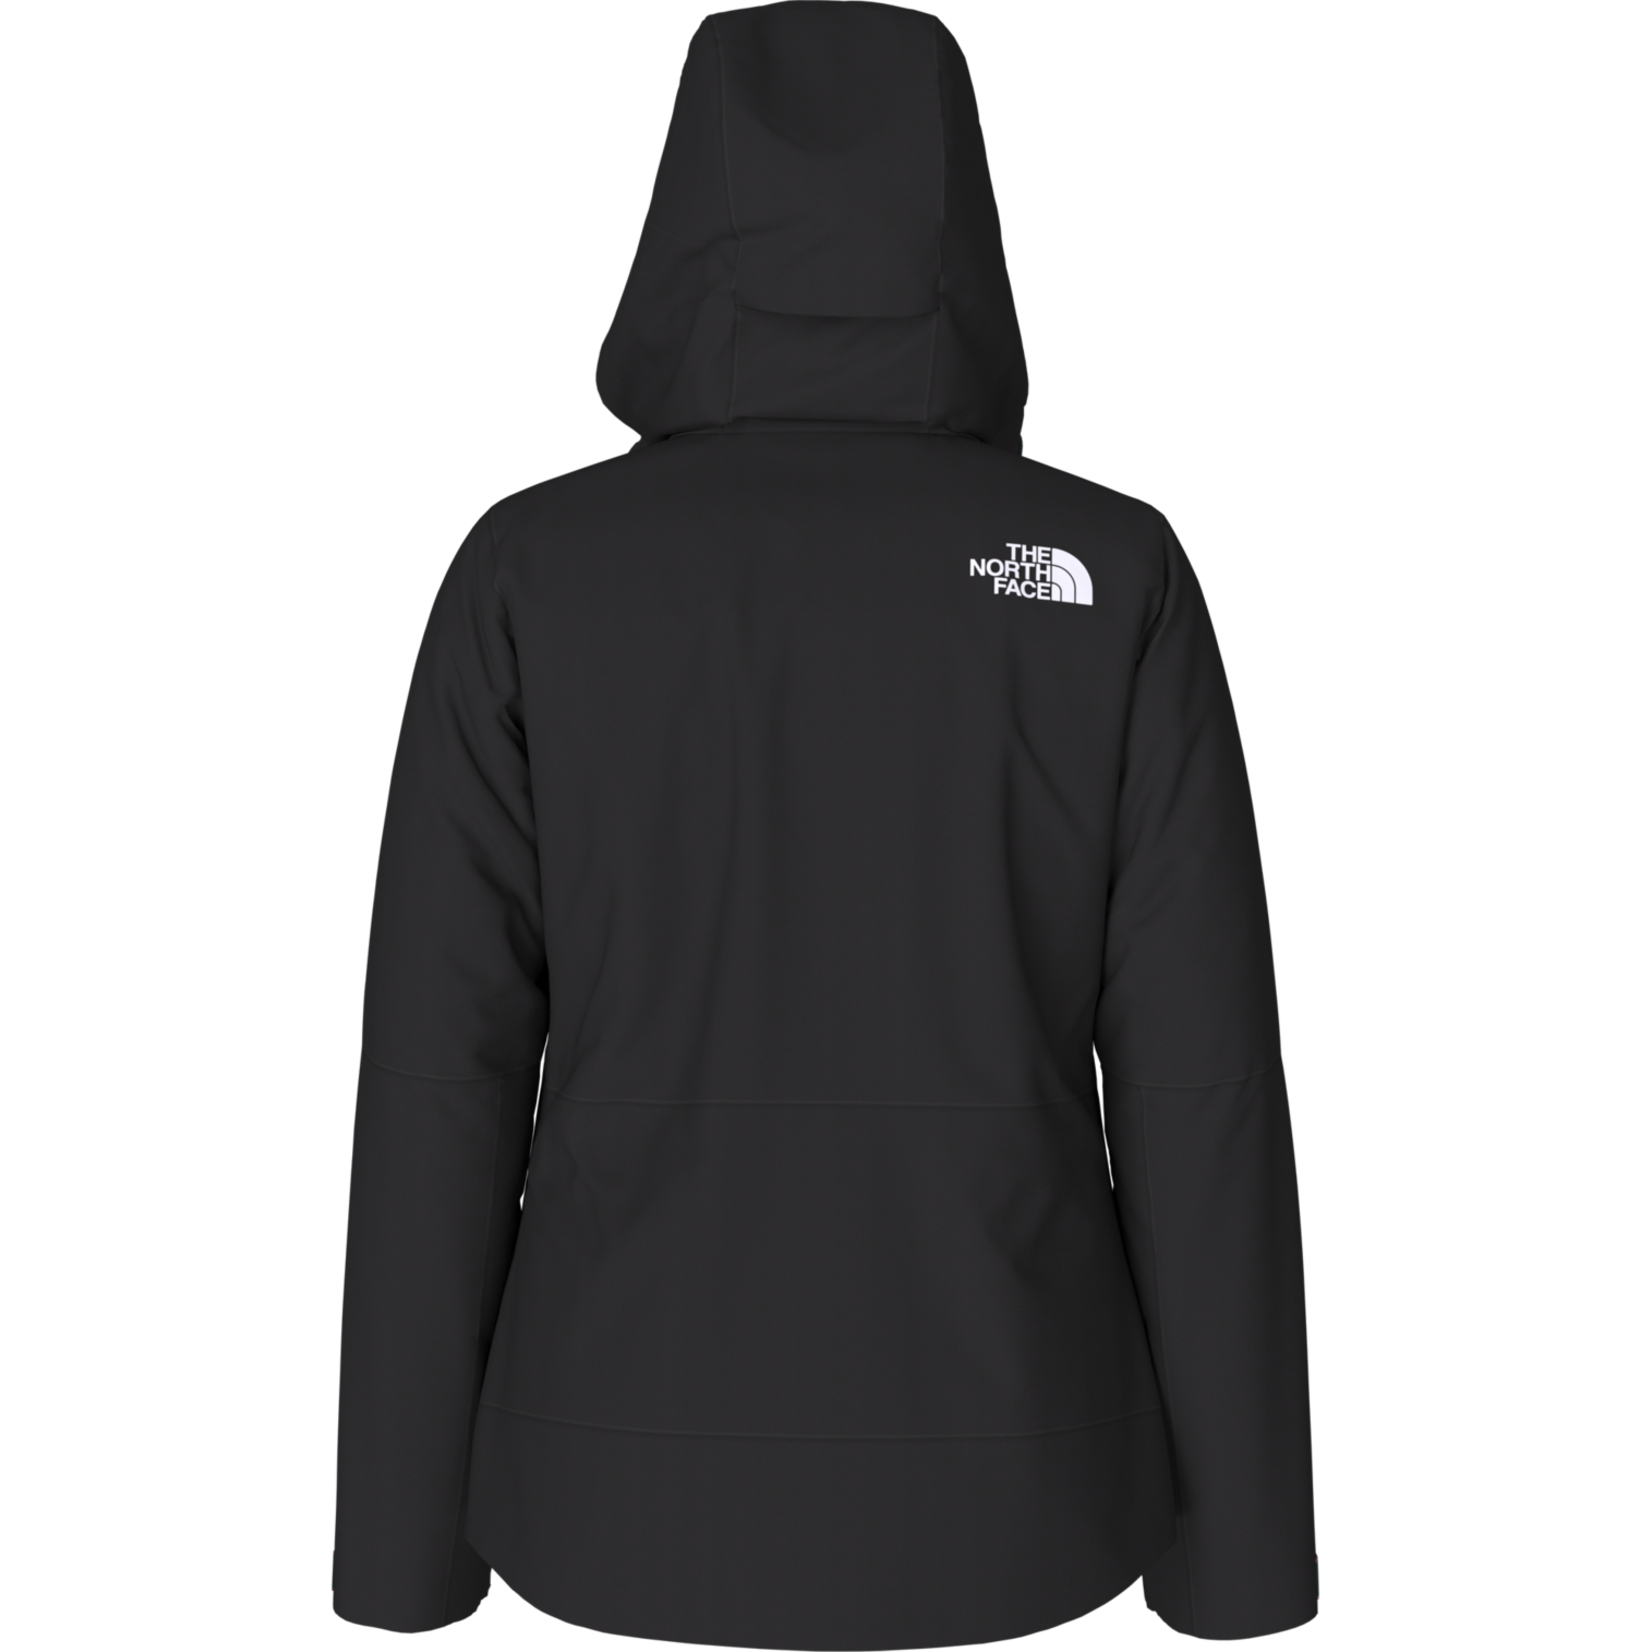 The North Face The North Face Women's  Garner Triclimate Jacket